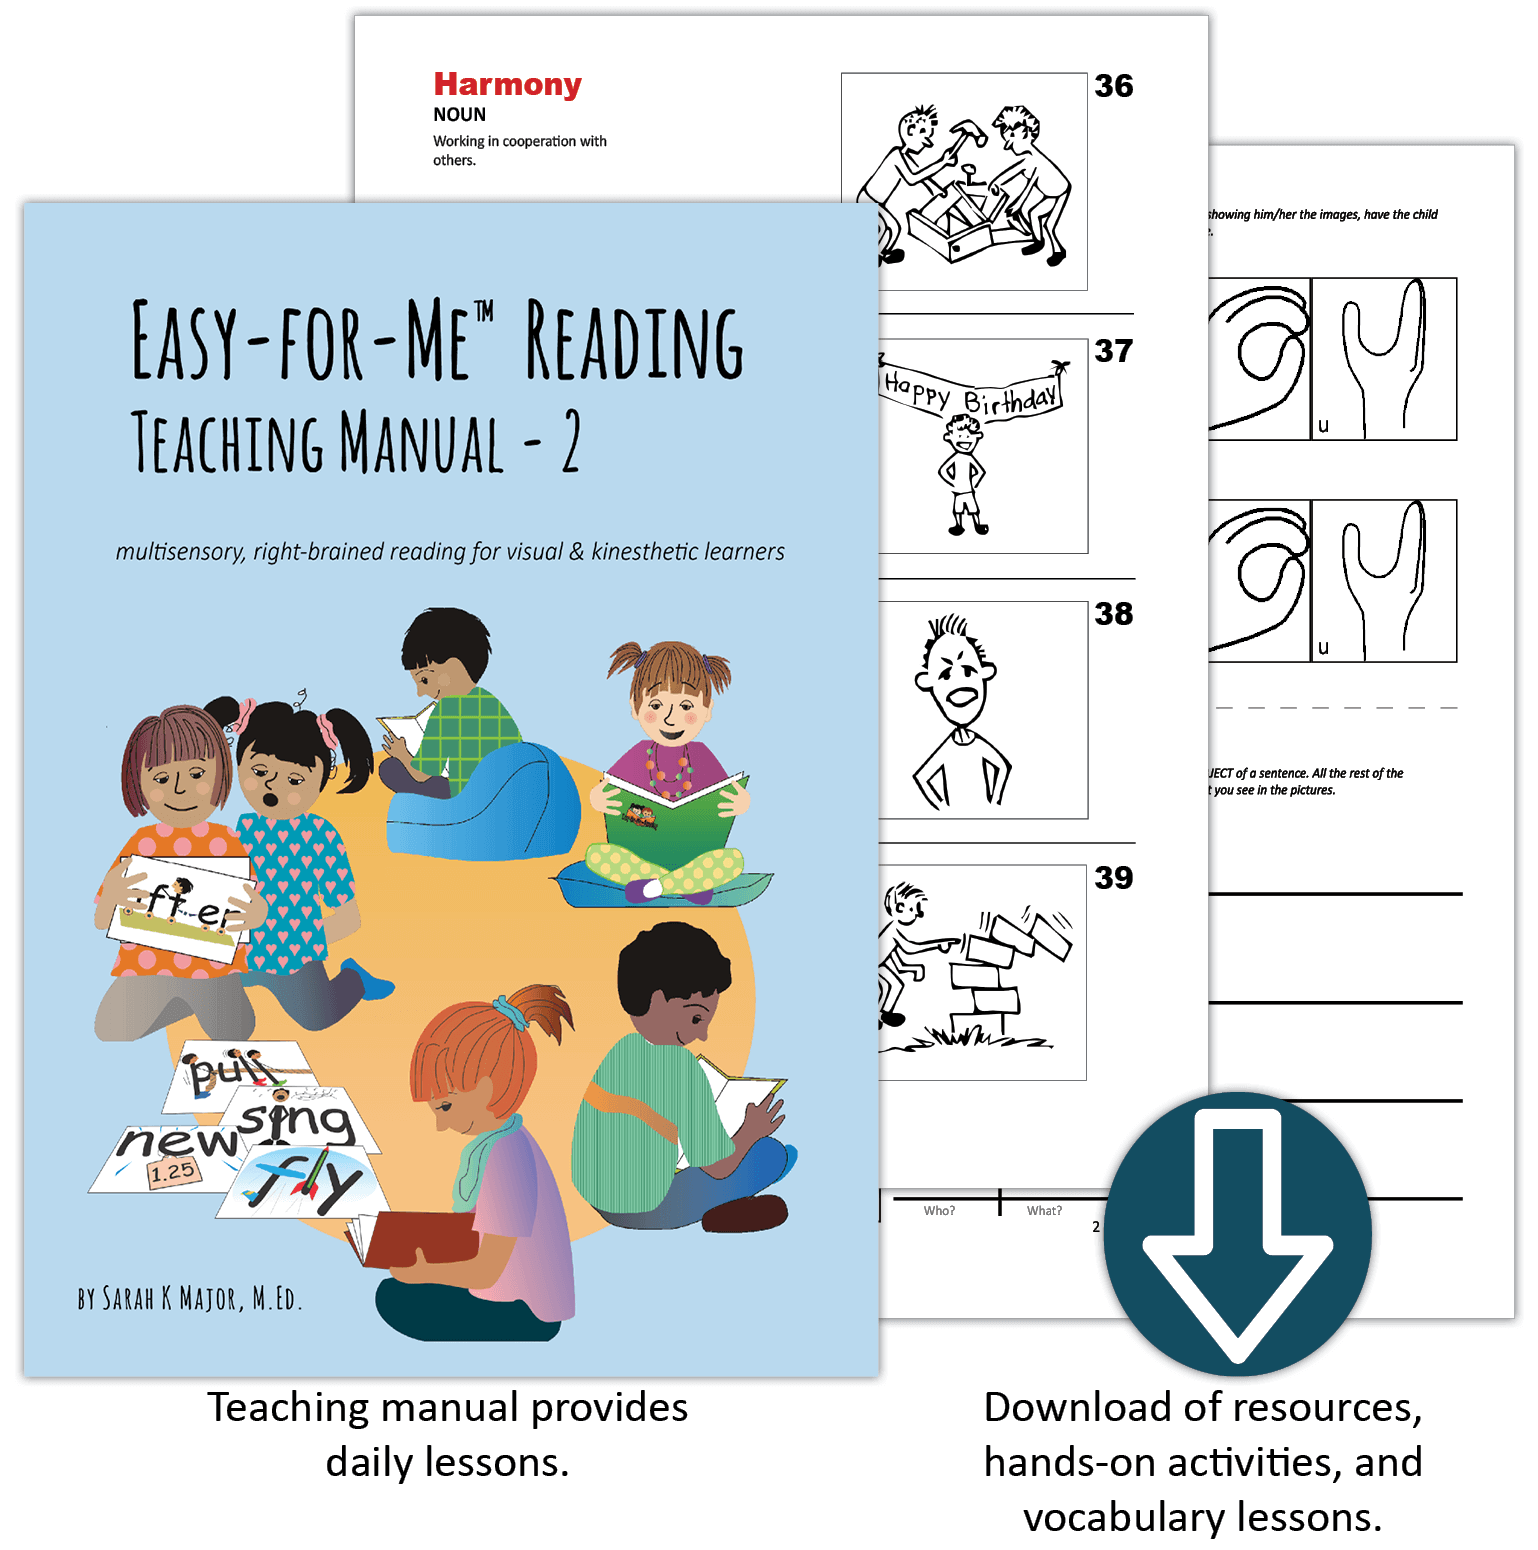 Easy-for-Me Reading Teaching Manual 2